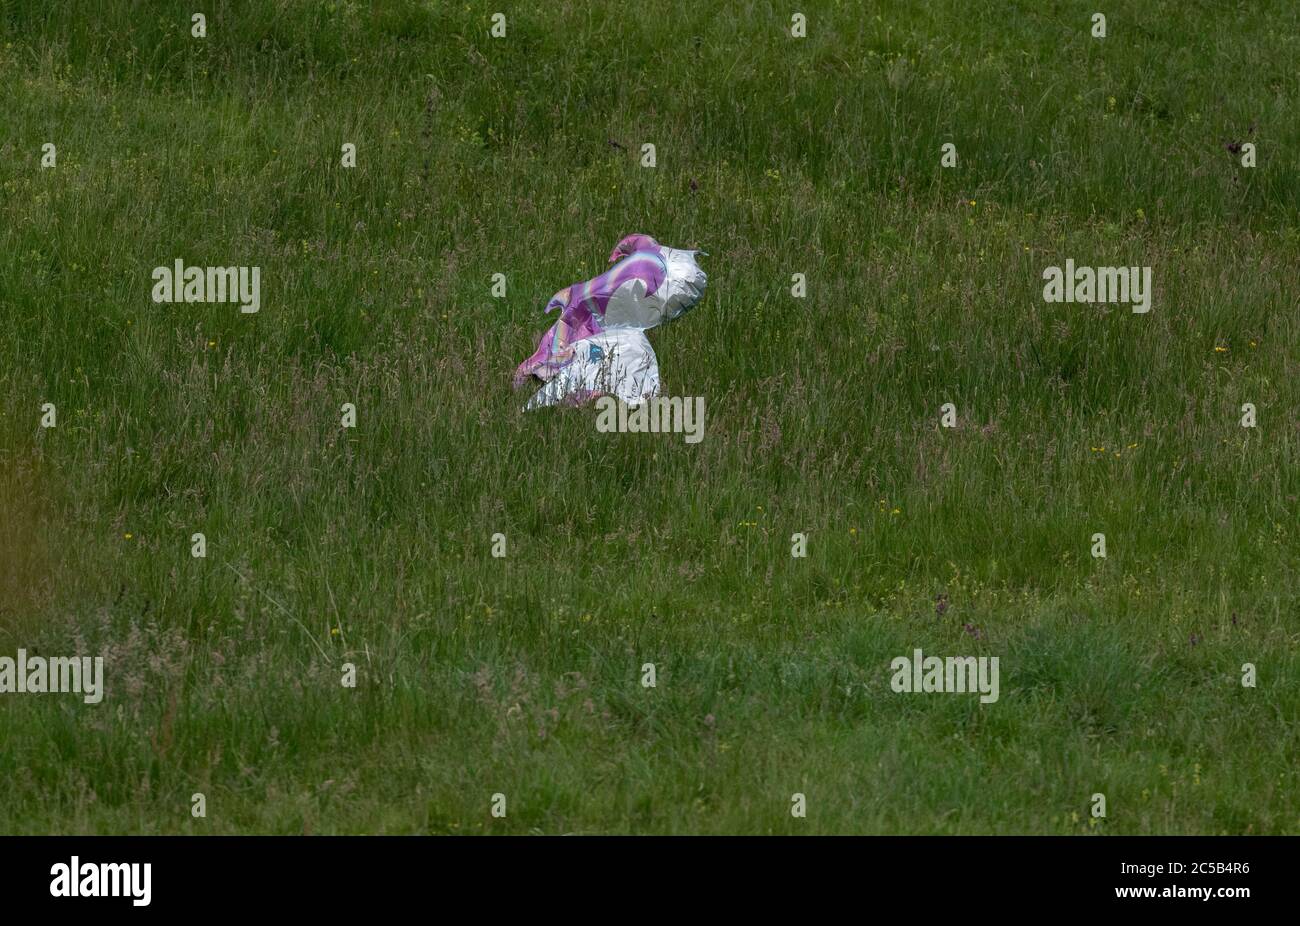 A deflated helium balloon in the shape of a unicorn has landed in a field. Balloon litter. Stock Photo